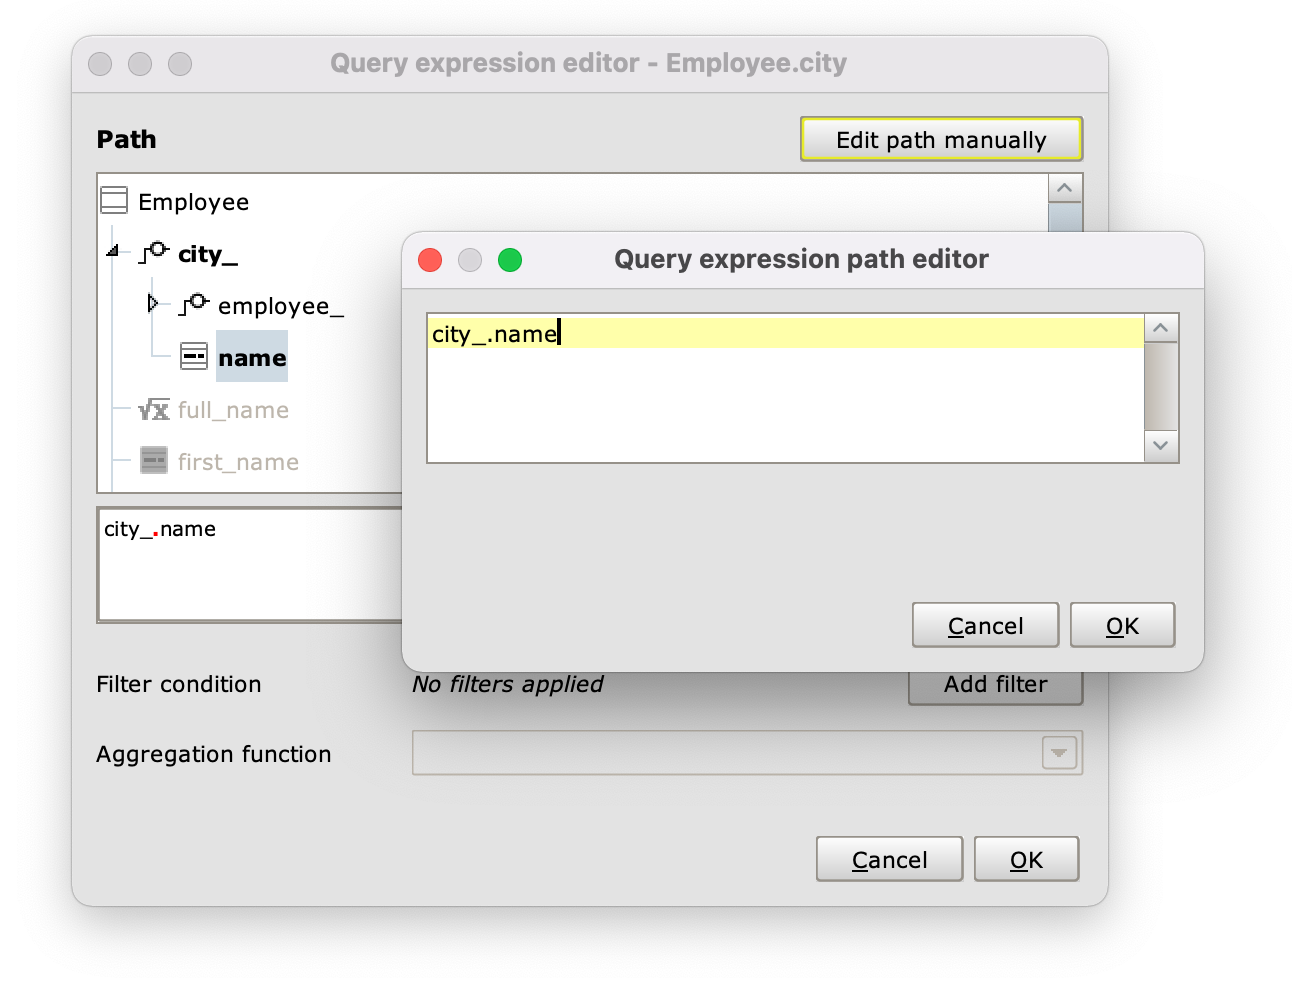 The Query expression editor